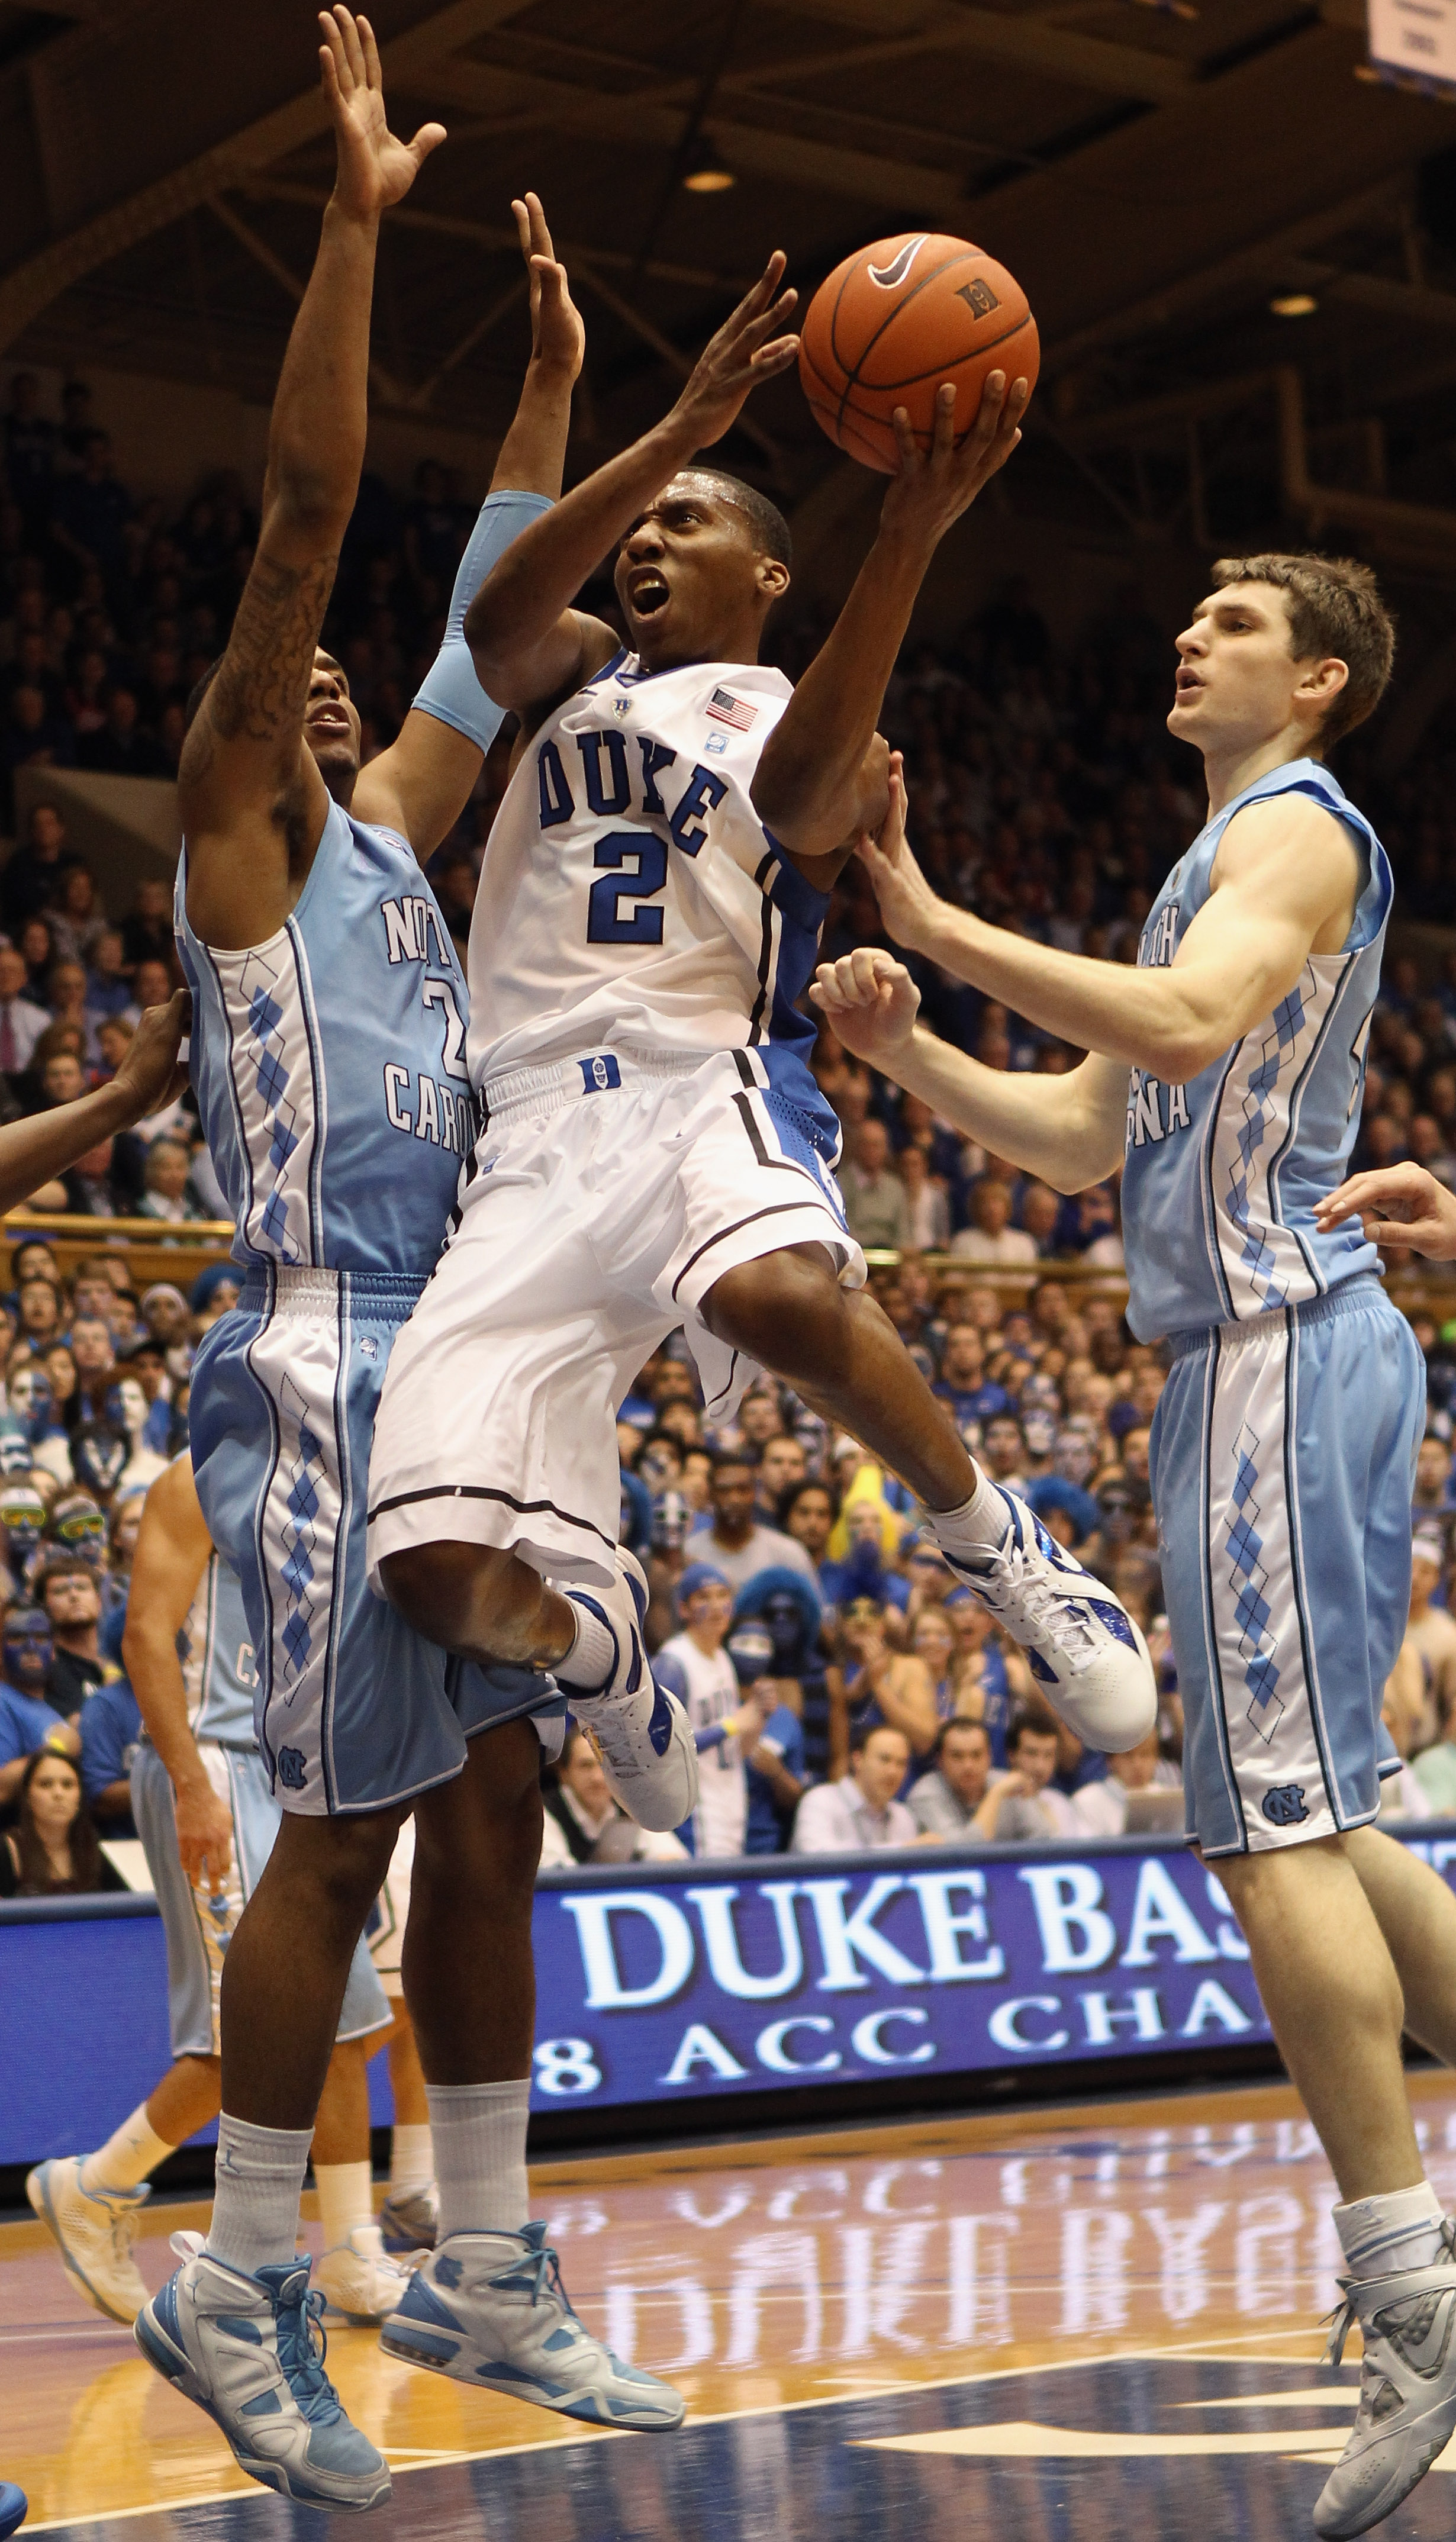 DURHAM, NC - FEBRUARY 09:  Tyler Zeller #44 of the North Carolina Tar Heels tries to stop Nolan Smith #2 of the Duke Blue Devils during their game at Cameron Indoor Stadium on February 9, 2011 in Durham, North Carolina.  (Photo by Streeter Lecka/Getty Ima